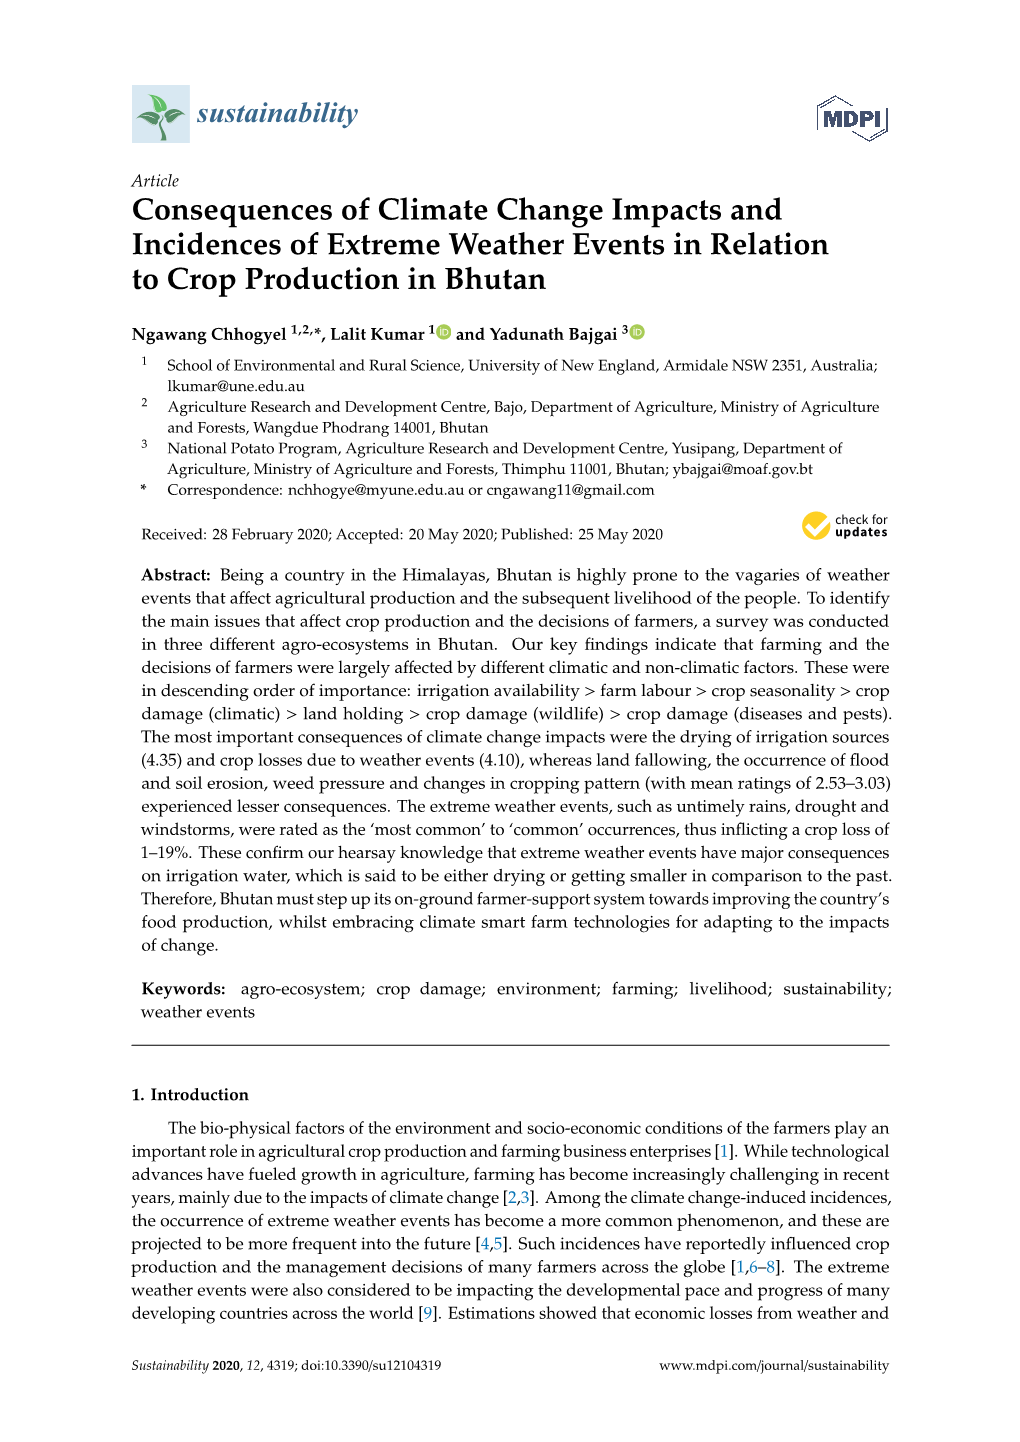 Consequences of Climate Change Impacts and Incidences of Extreme Weather Events in Relation to Crop Production in Bhutan